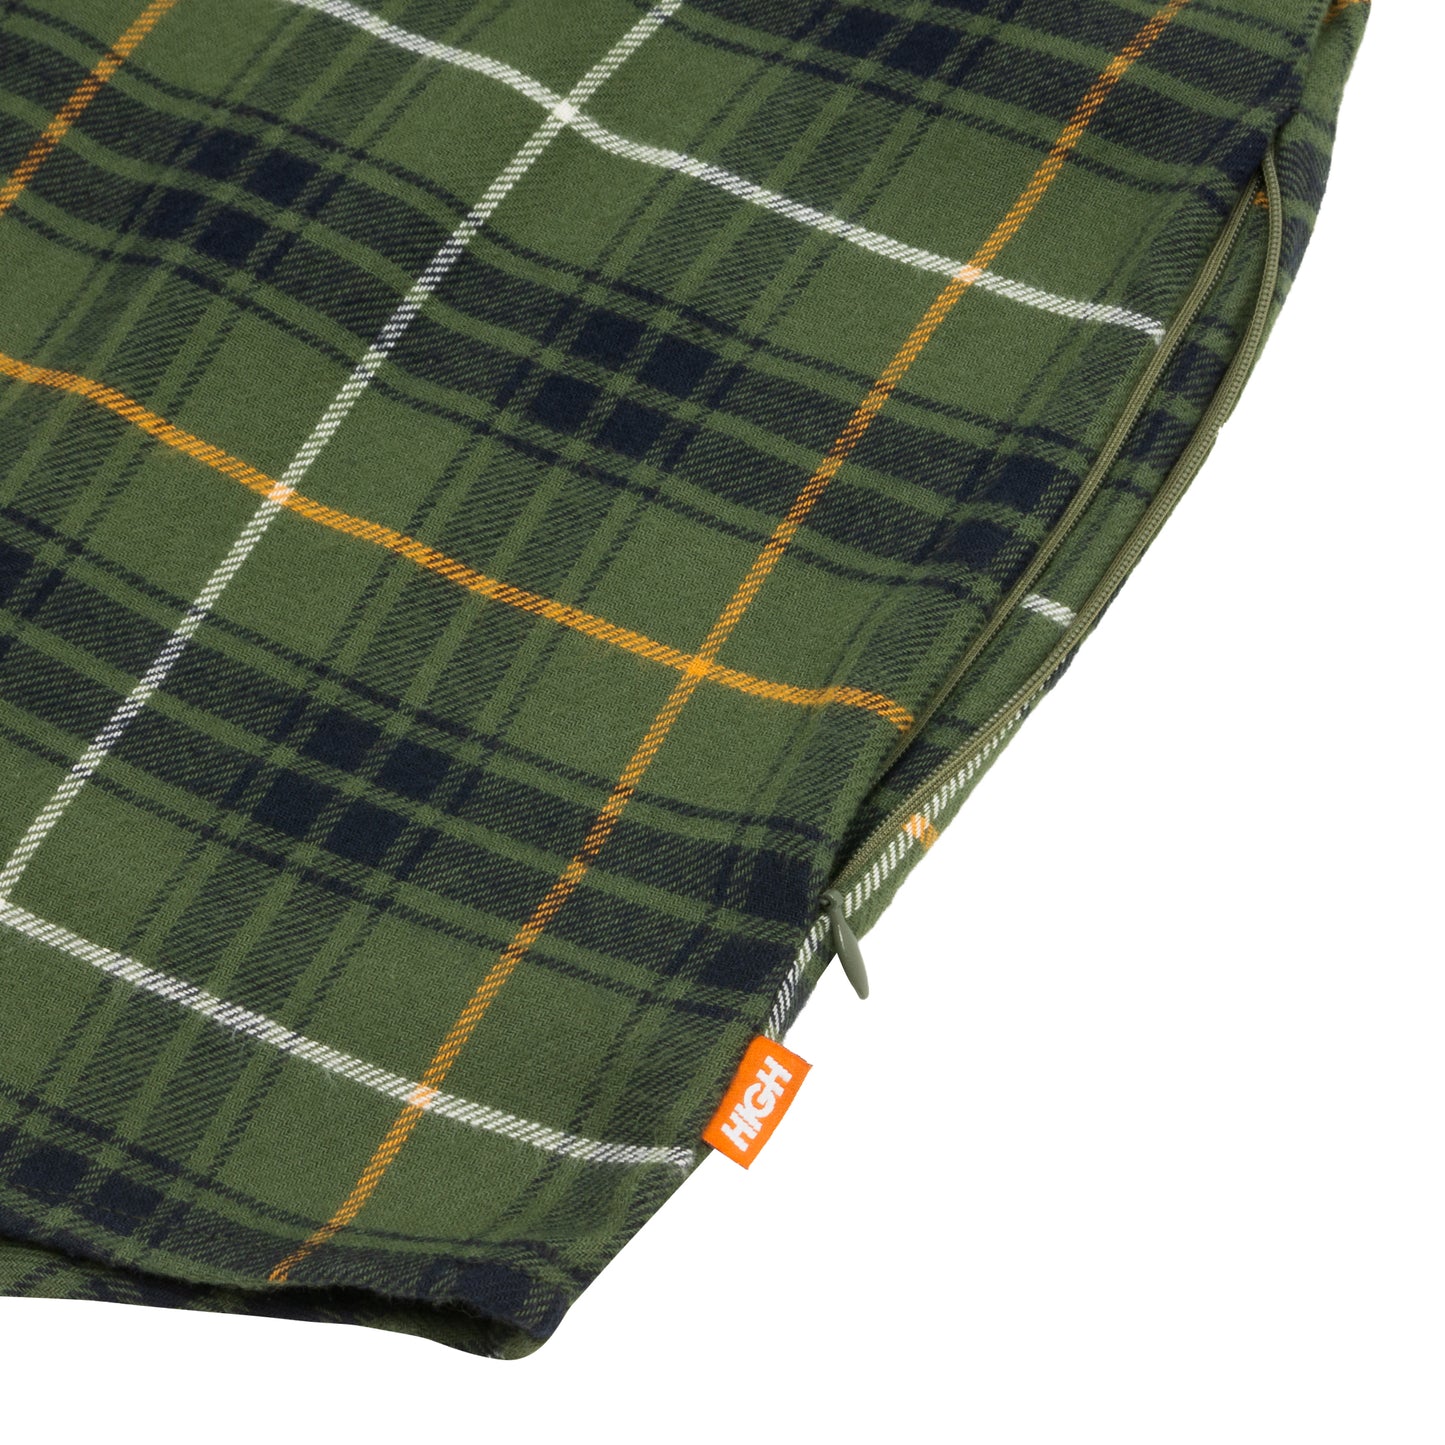 HIGH - Flannel Shirt Equipment "Green" - THE GAME